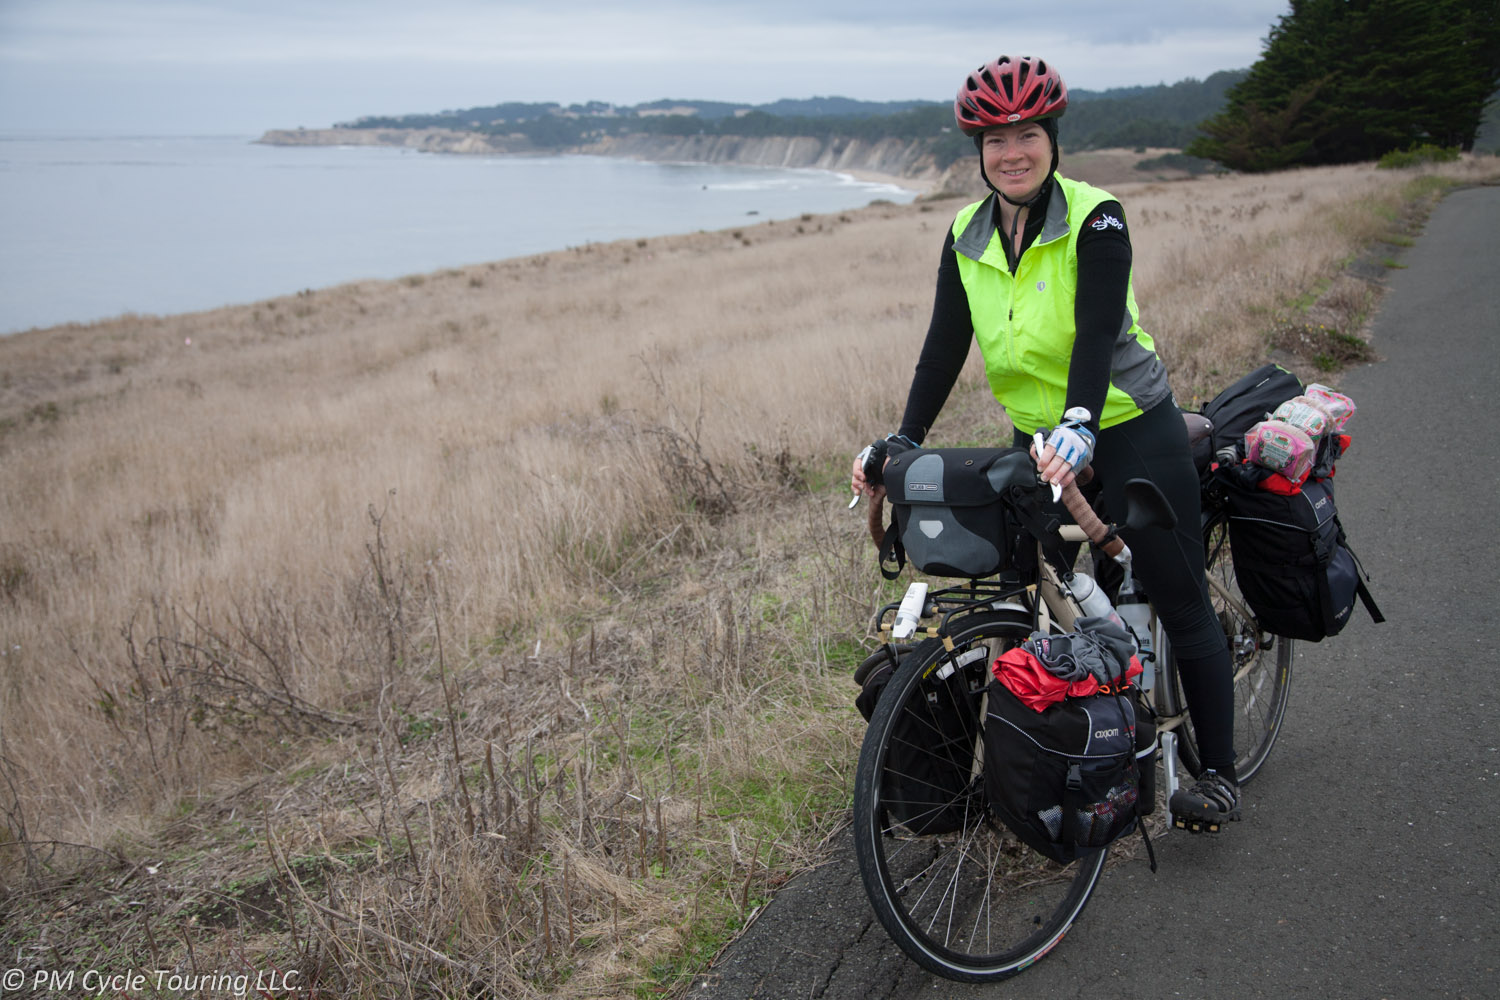 A woman on a touring bicycle stopped near the Pacific Ocean